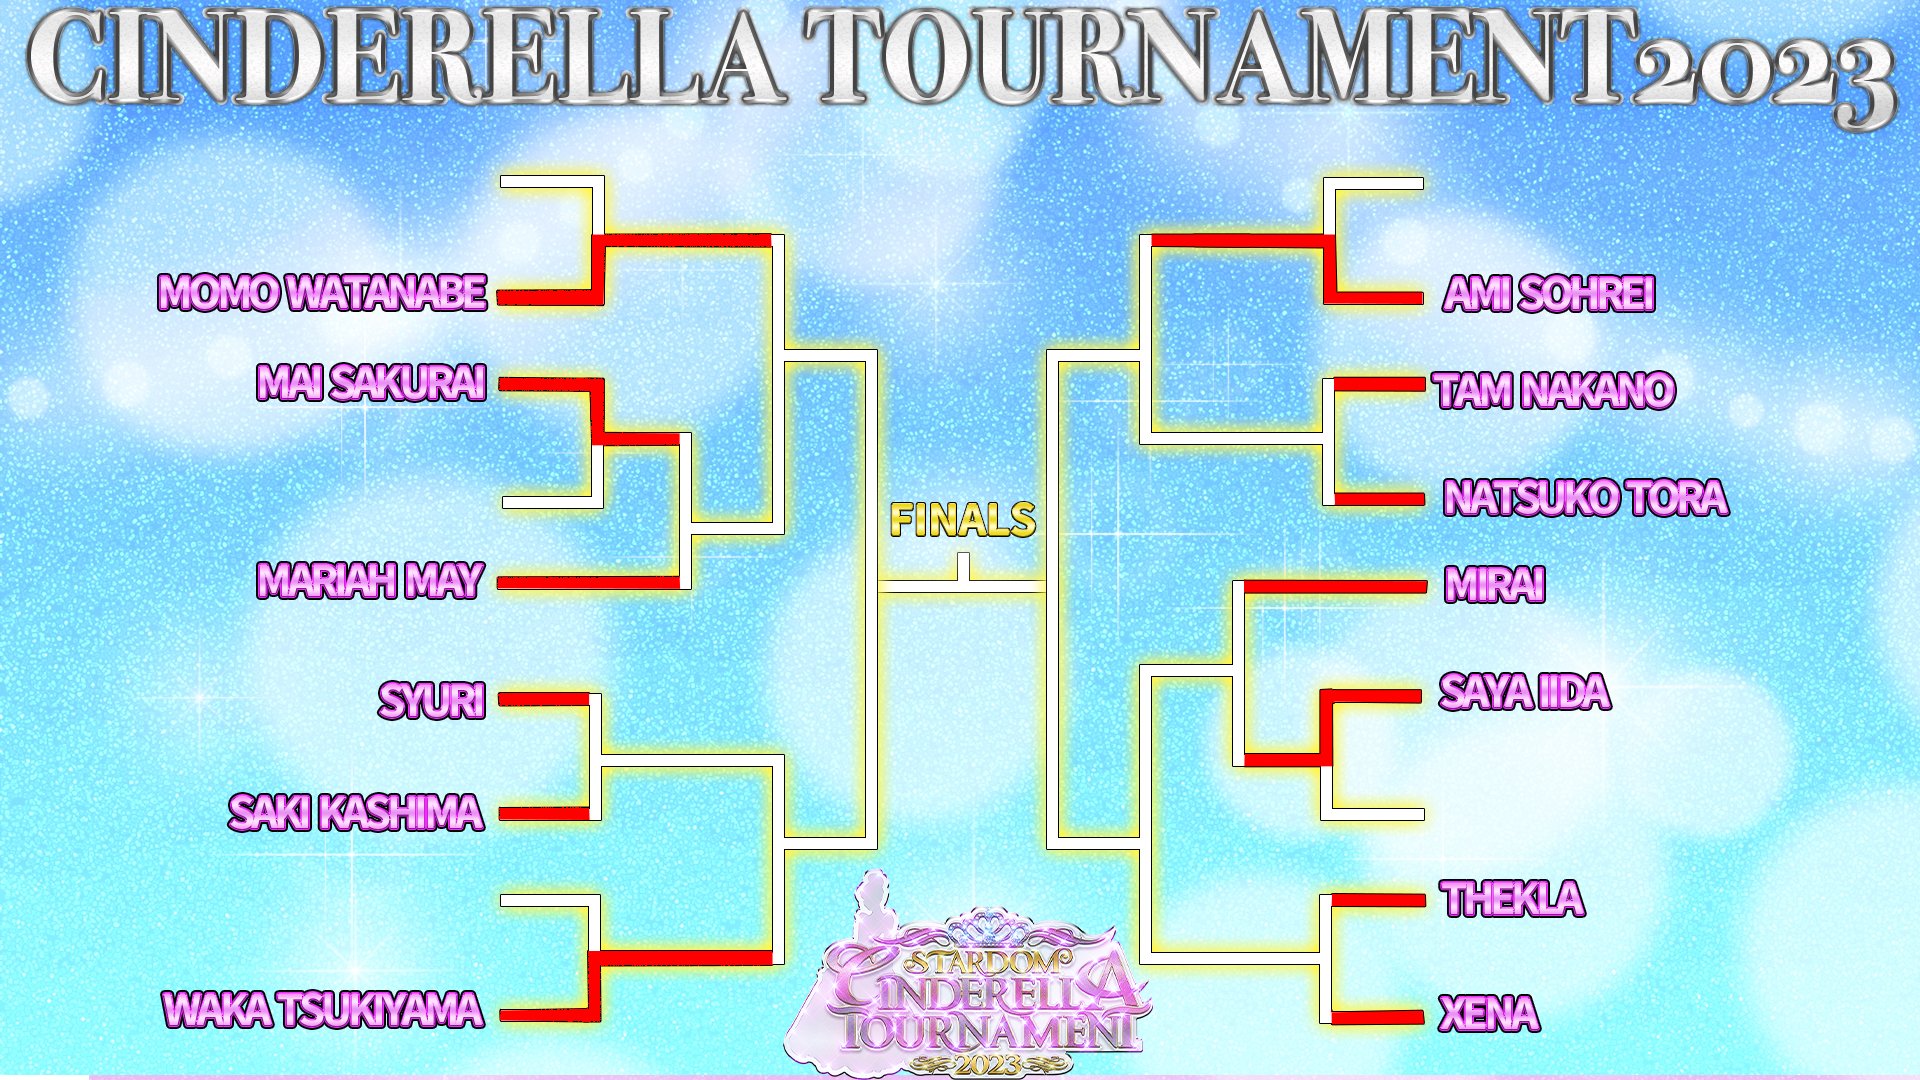 We Are Stardom on Twitter "This is where the Cinderella Tournament